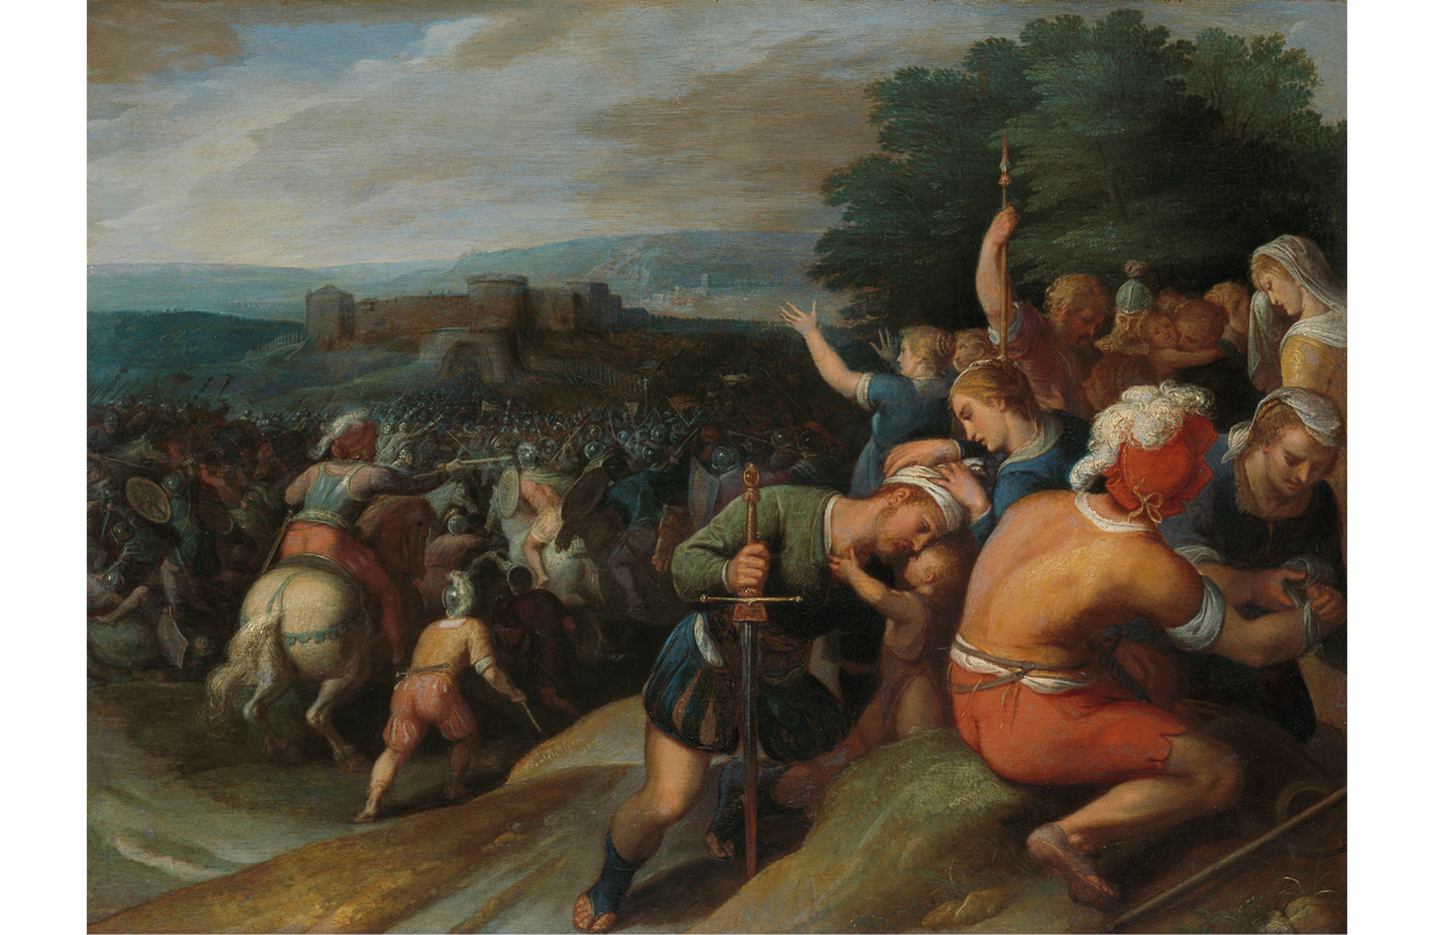 An oil painting ca. 1600-1613 depicting the revolt of the Batavians against the Romans: to the right, a man with a sword embraces a child while comforted by a woman, besides them, a woman treats a soldier's wounds; behind them, a mourning crowd looks towards two armies of foot soldiers and cavalrymen face each other; trees and a stronghold are seen in the background.